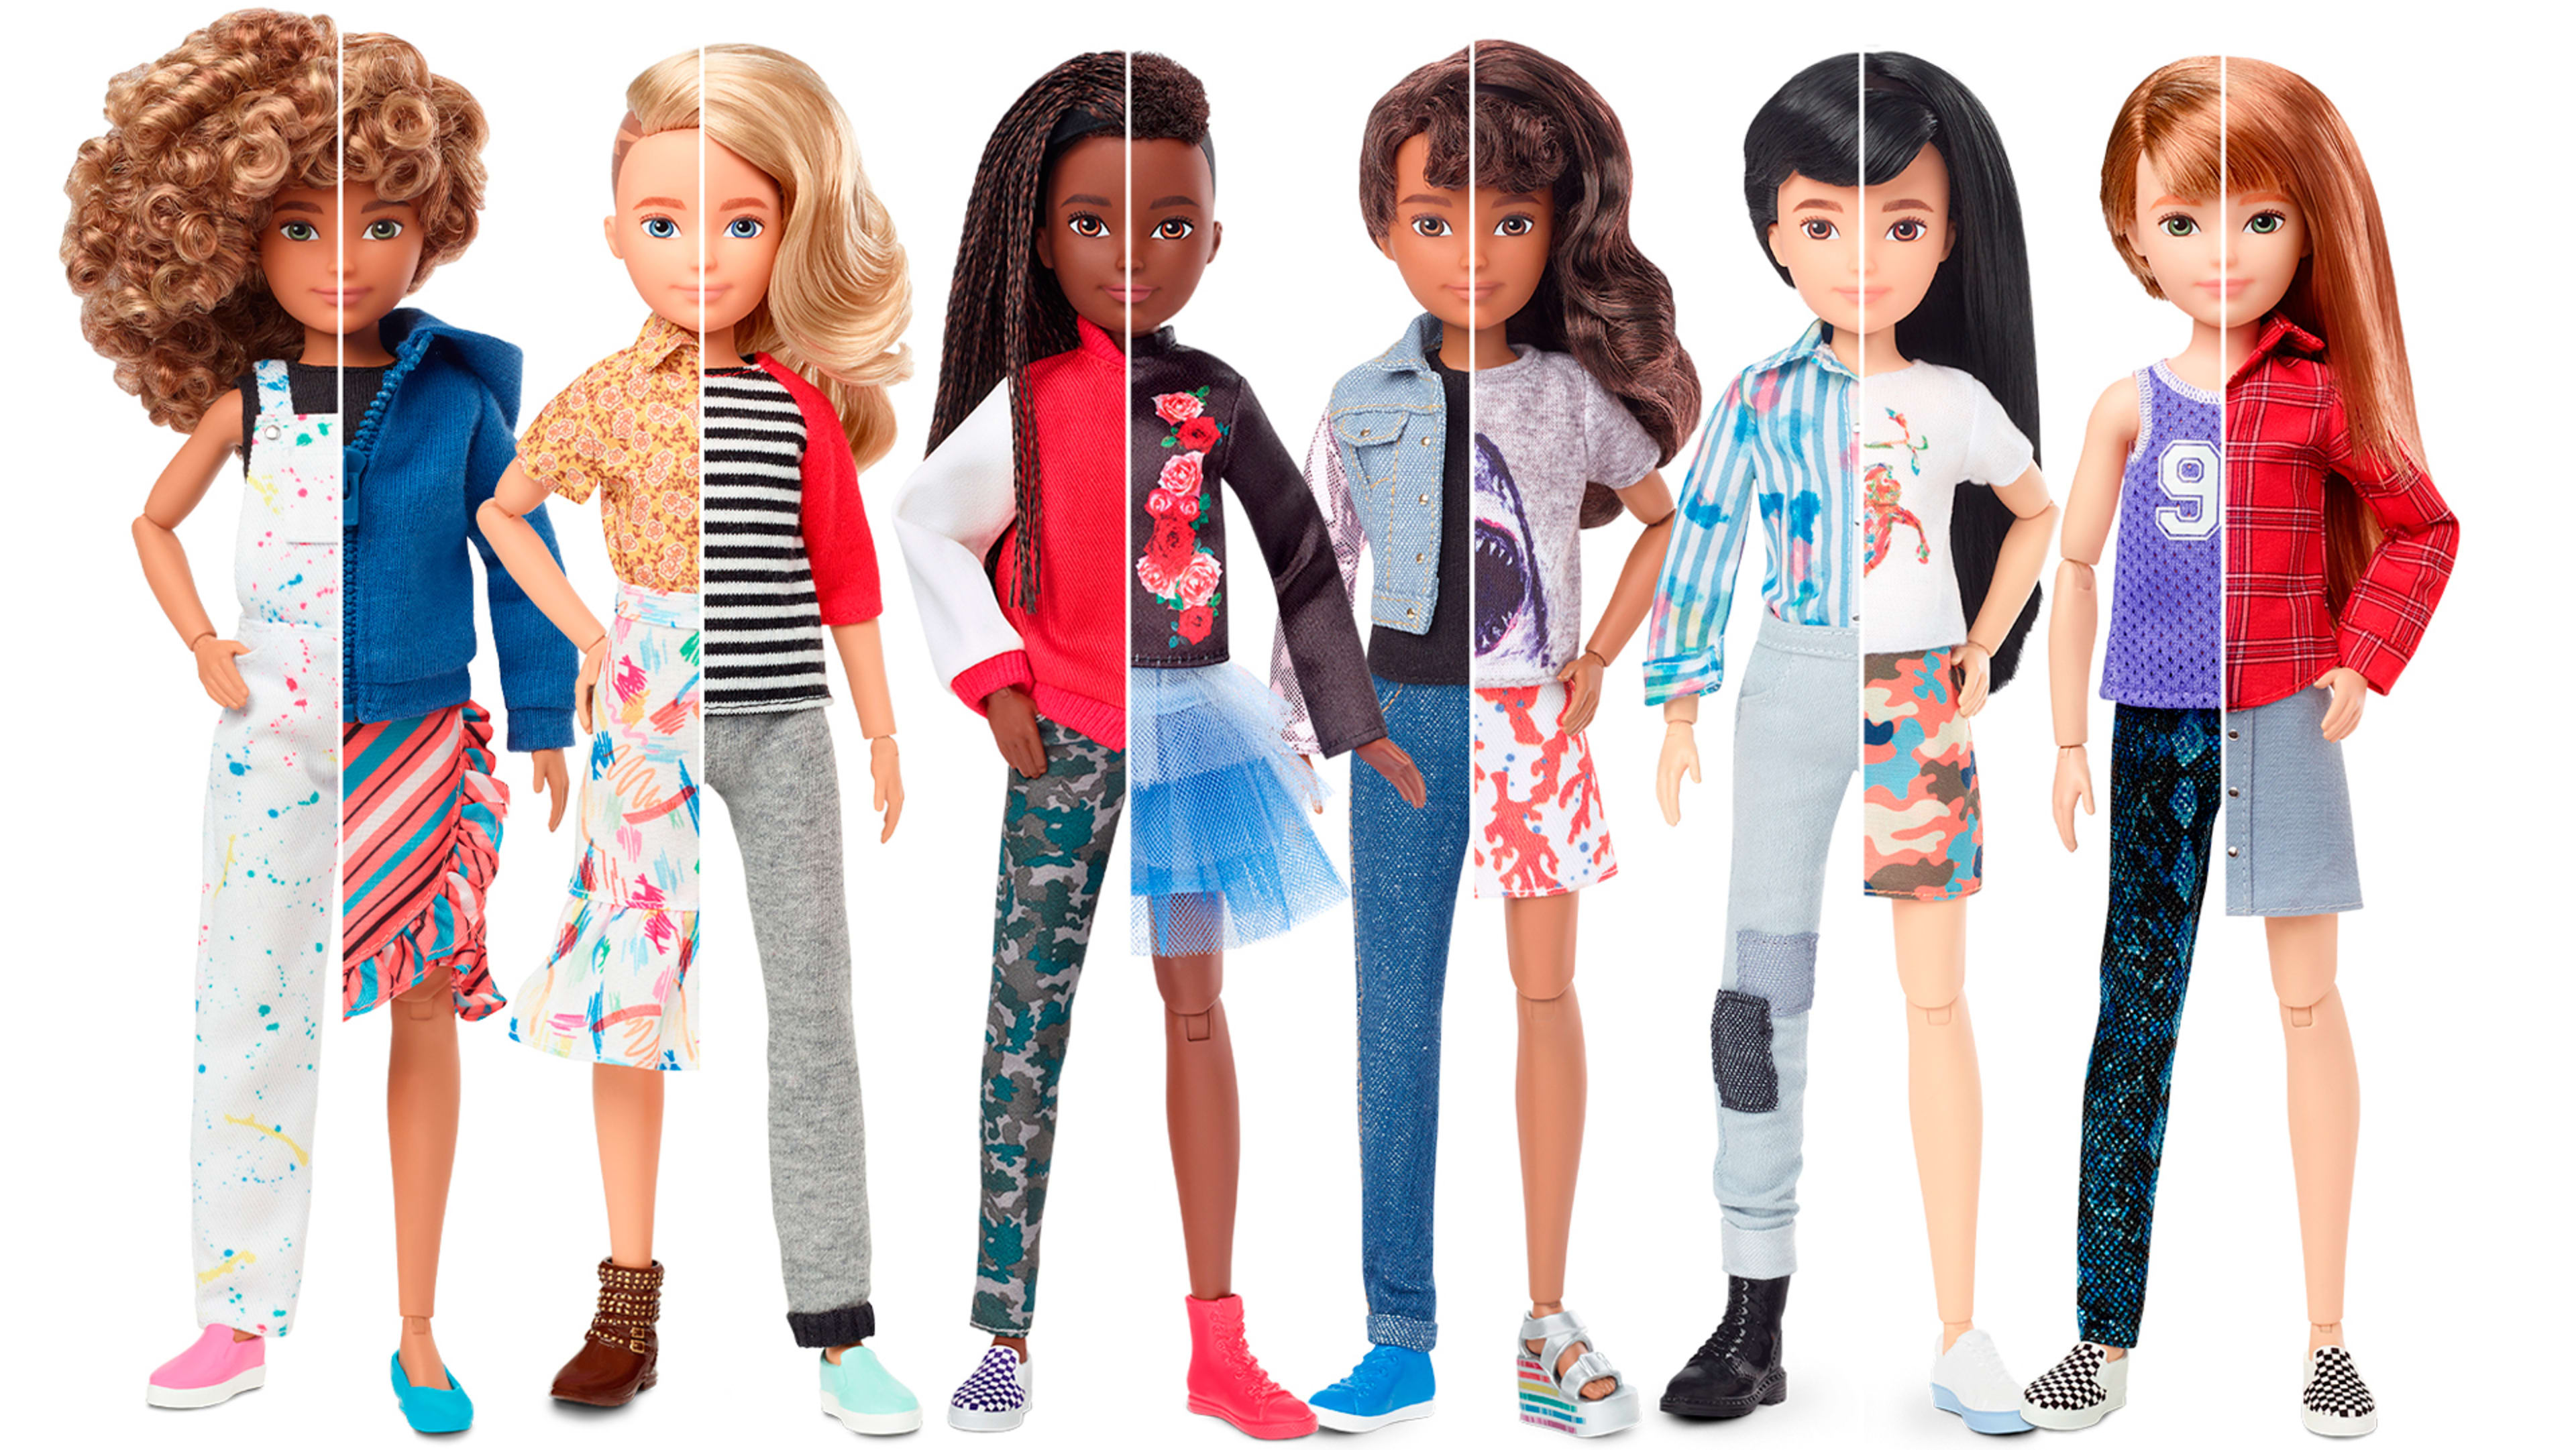 Mattel just launched a line of gender-neutral dolls